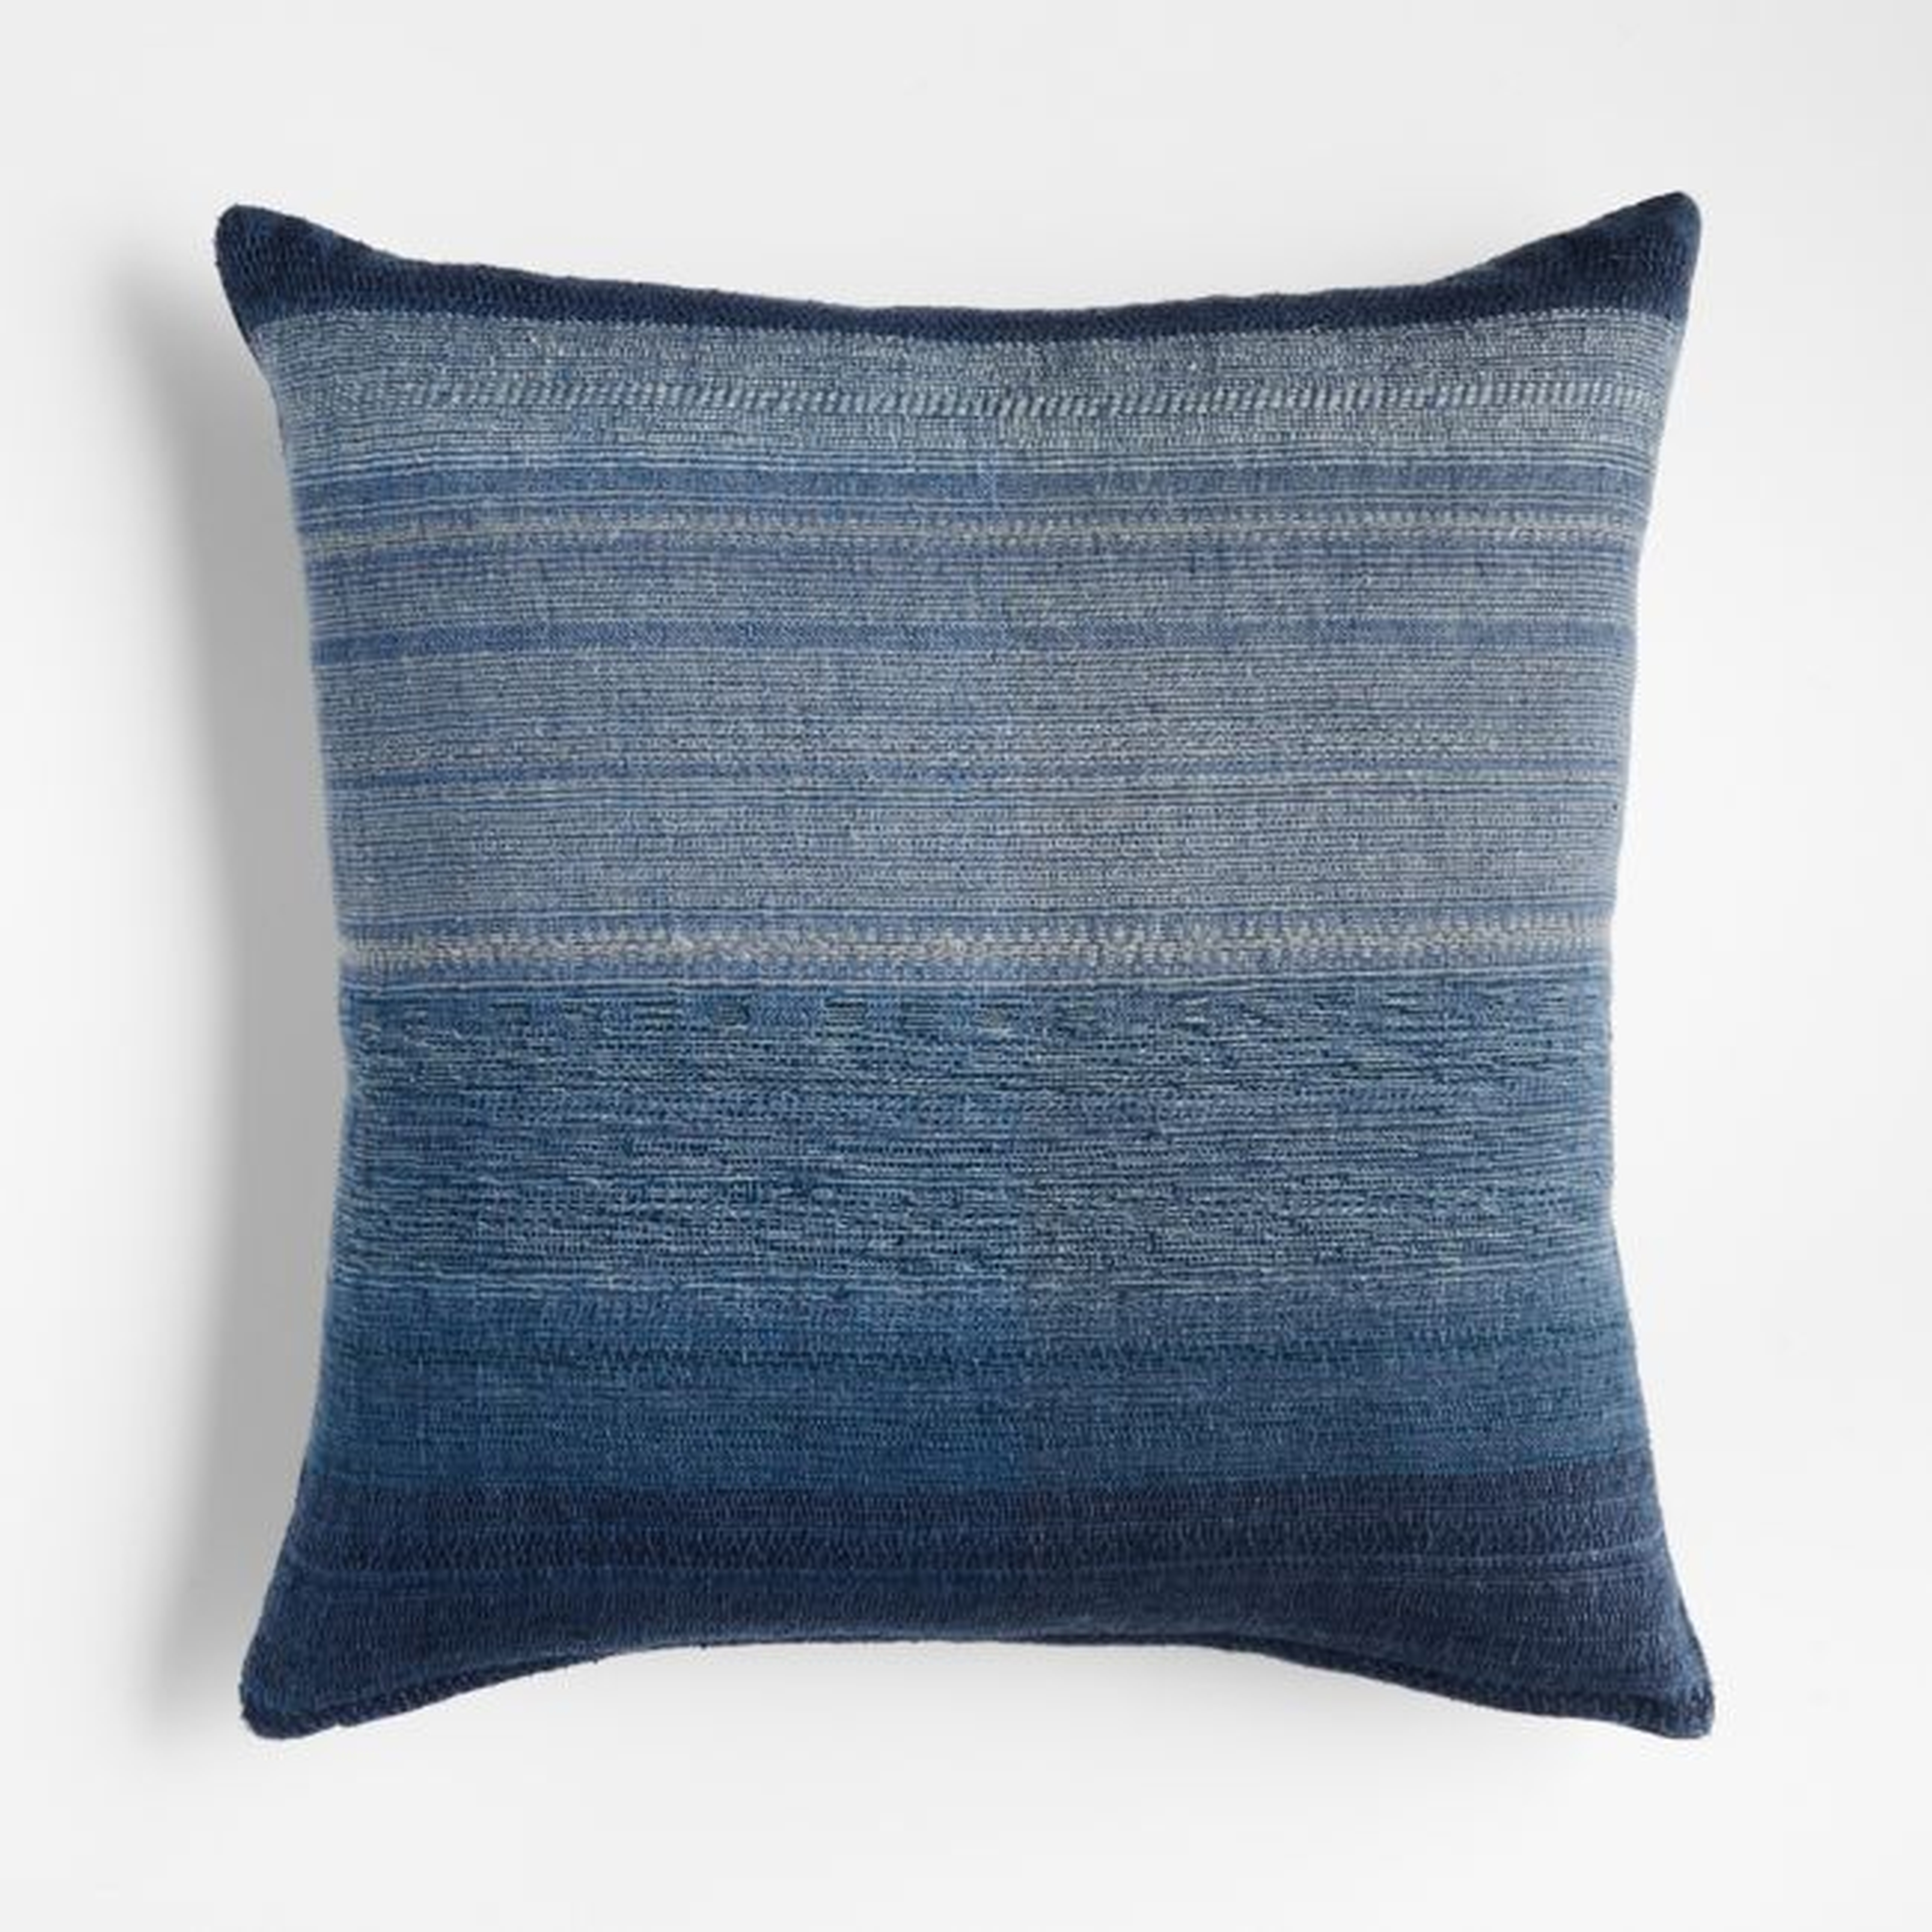 Veleri 20"x20" Linen Blue Throw Pillow Cover with Feather Insert - Crate and Barrel